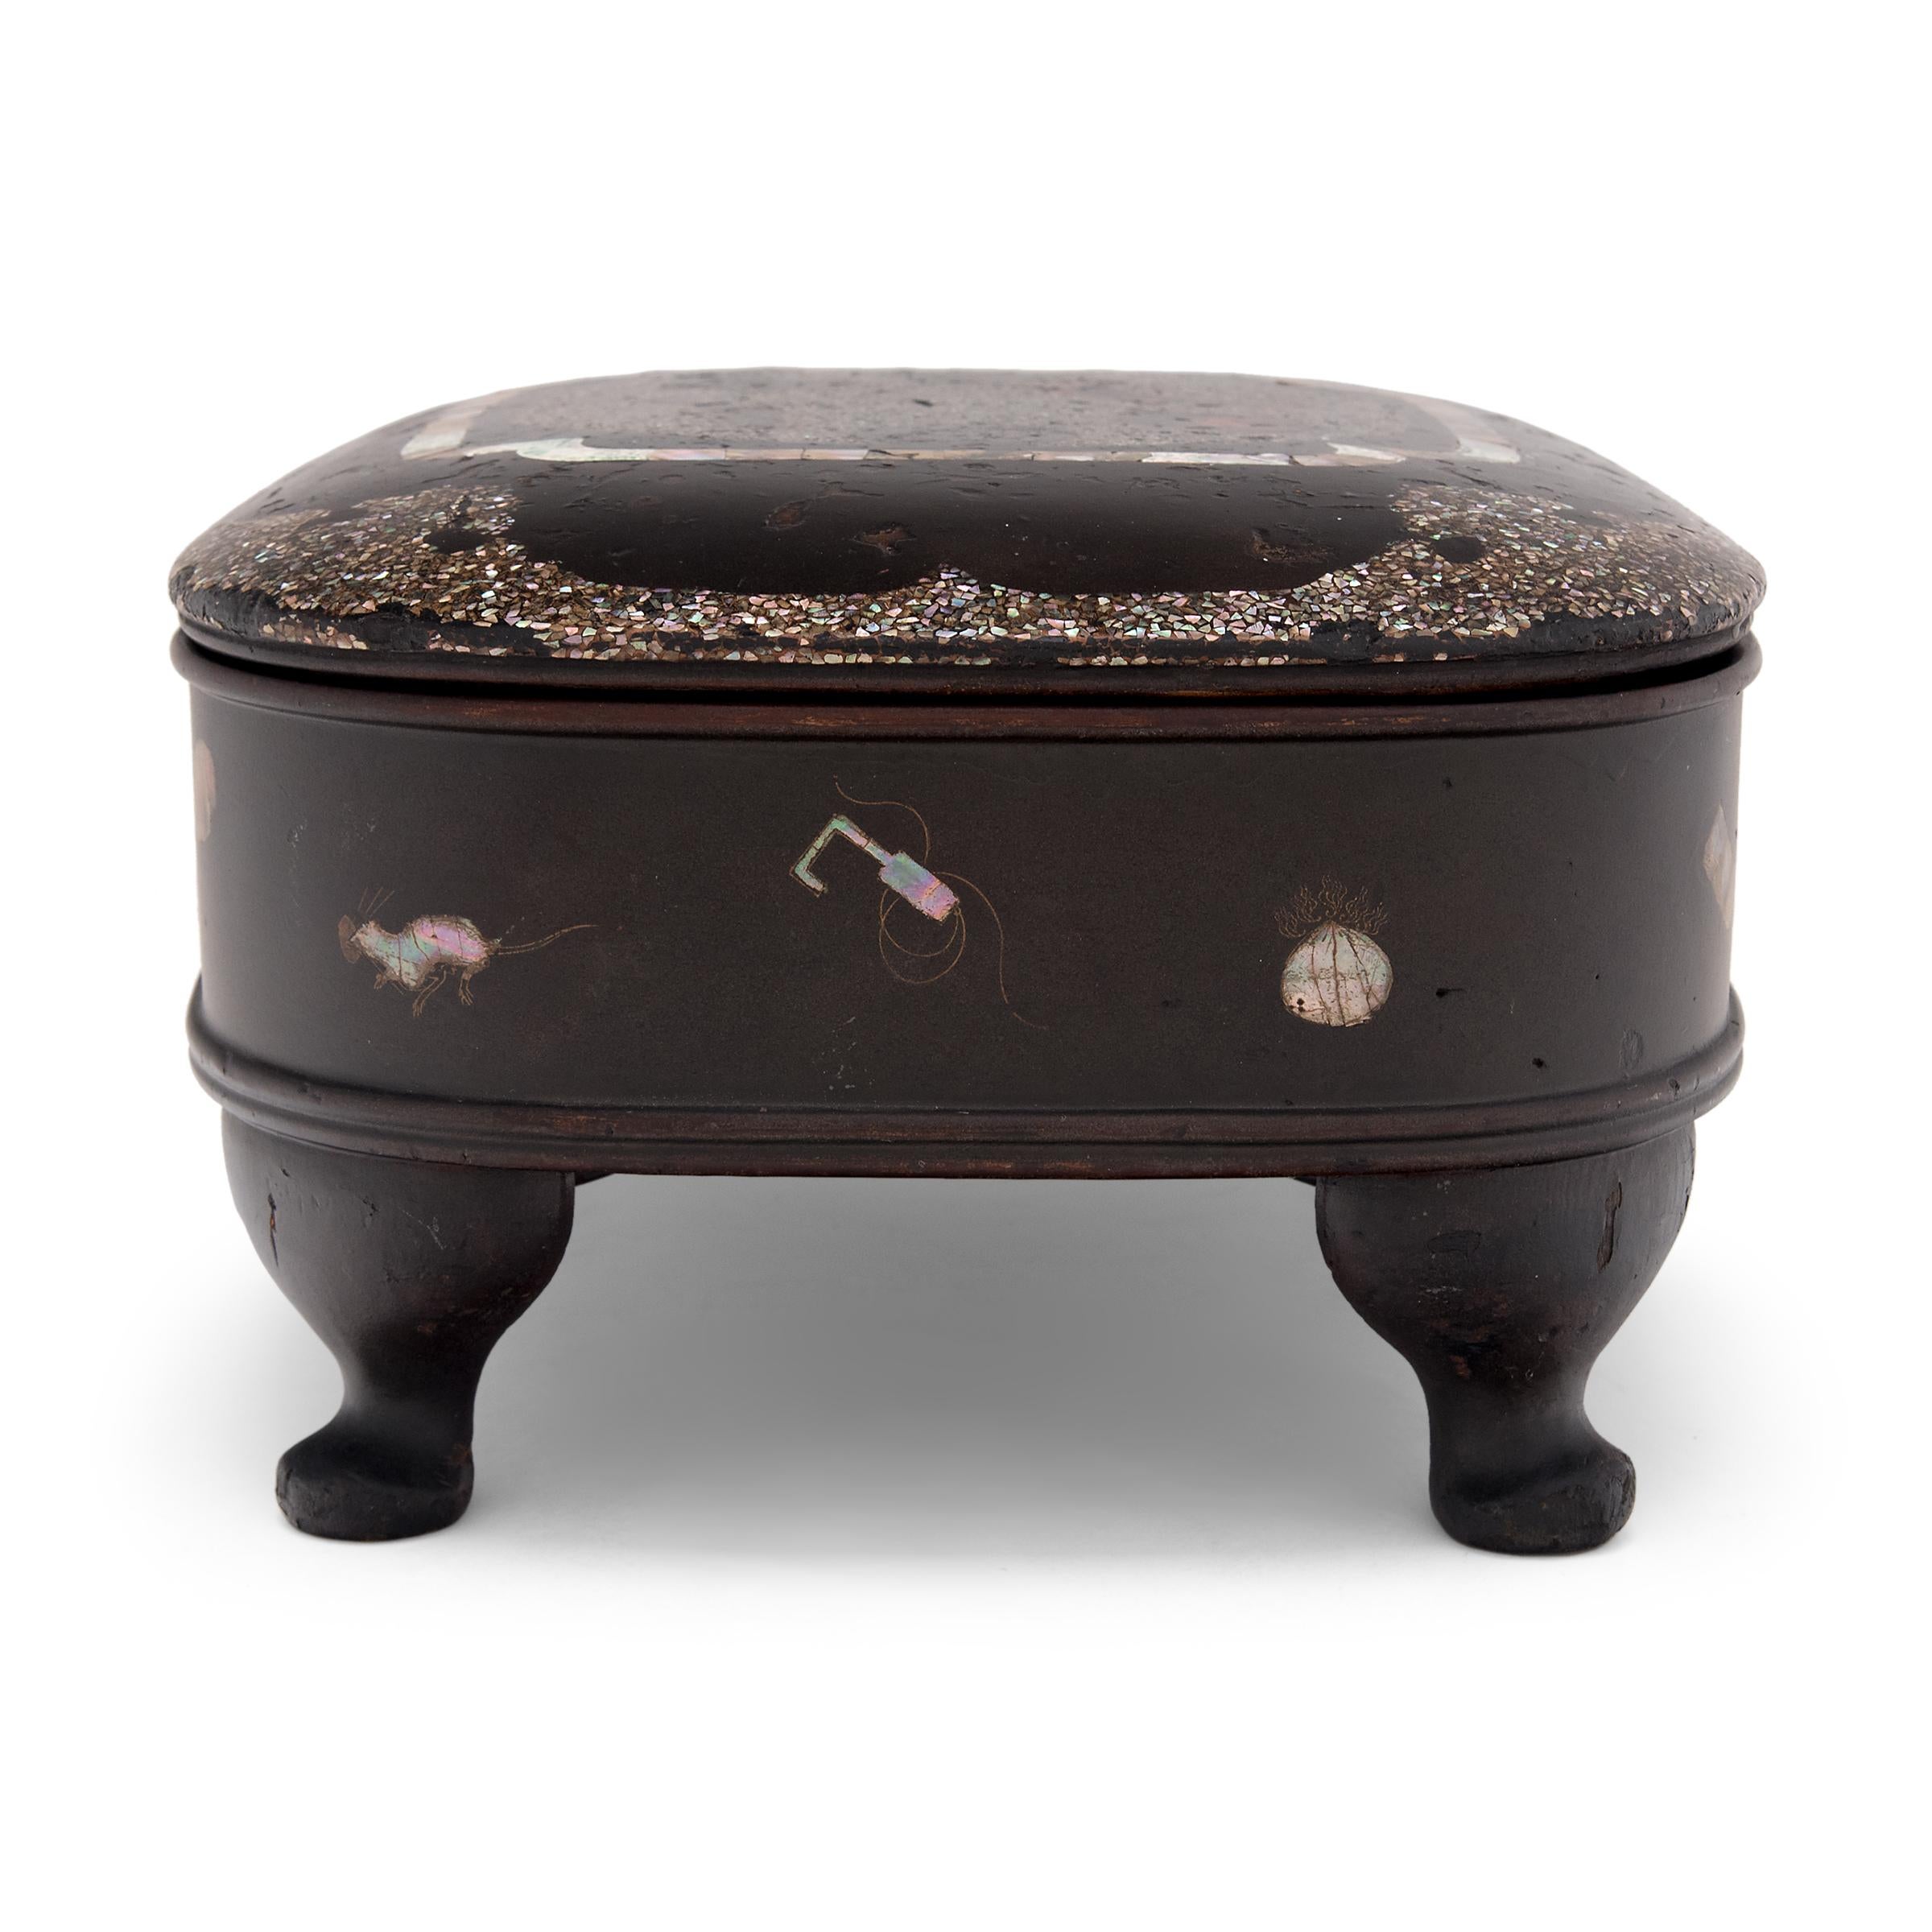 20th Century Korean Table Chest with Mother-of-Pearl Inlay, C. 1900